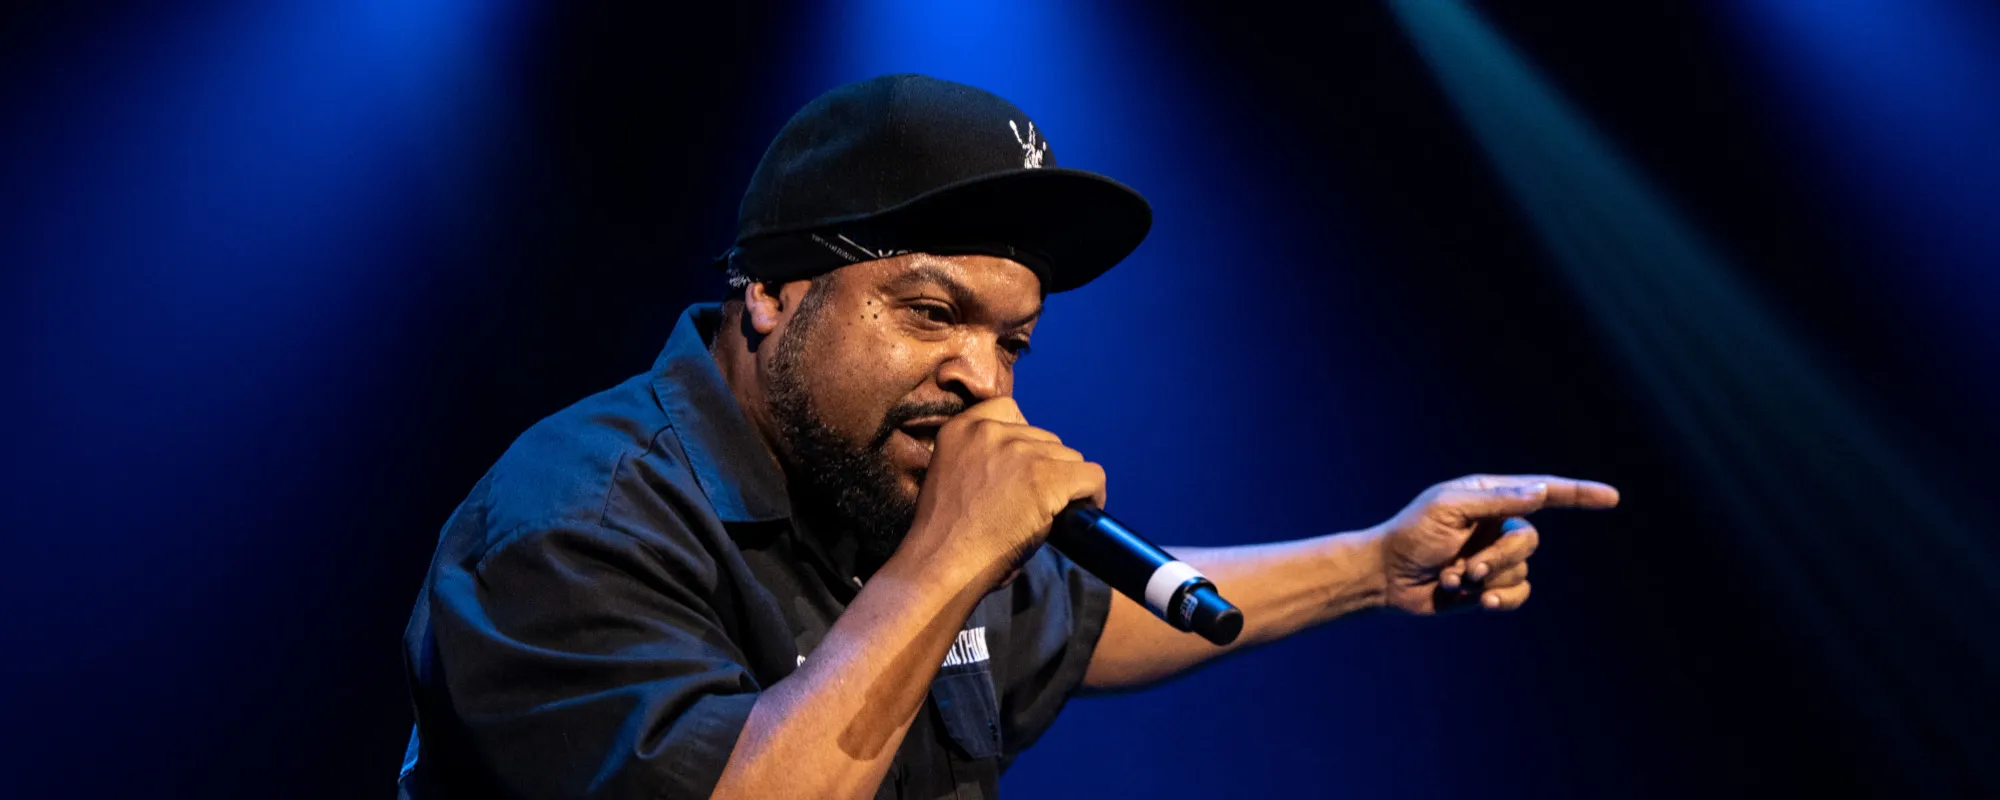 The Lighthearted Meaning Behind Ice Cube’s “It Was A Good Day”